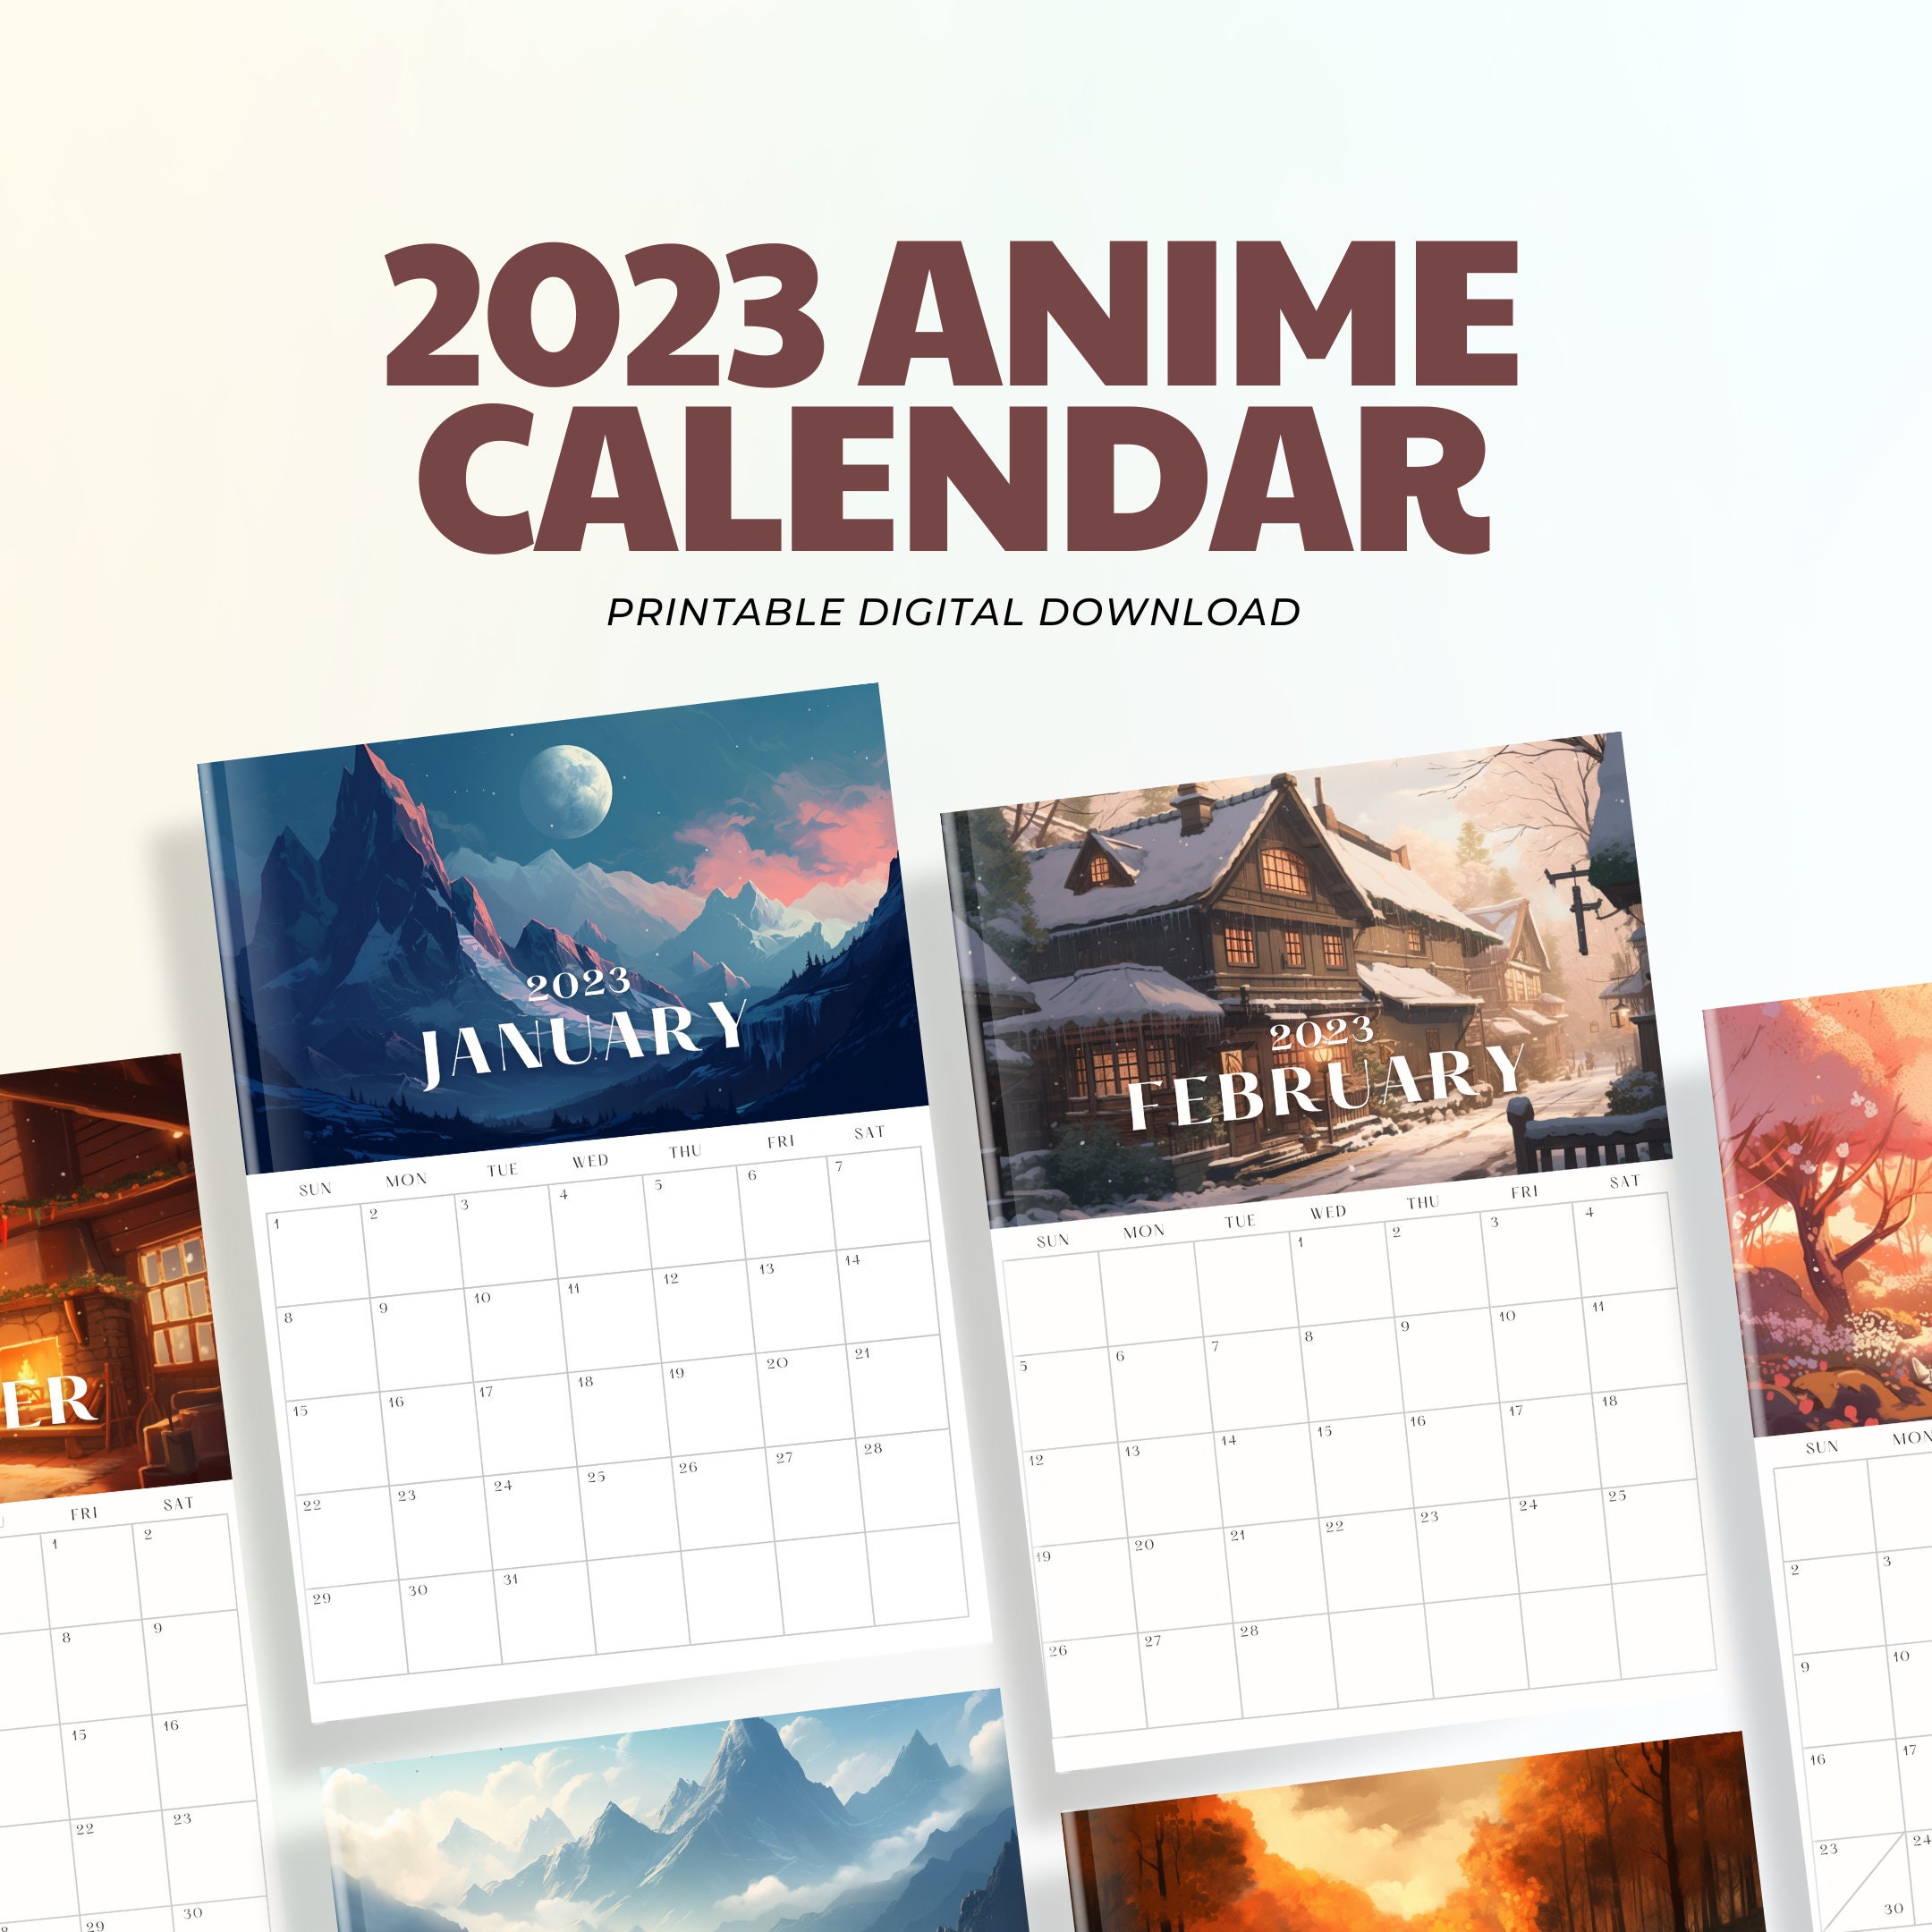 Mua 89 - Eighty Six 2022 Calendar: Anime-Manga OFFICIAL calendar 2022 -89 -  Eighty Six Weekly & Monthly Planner with Notes Section for Alls 89 - Eighty  ... 17